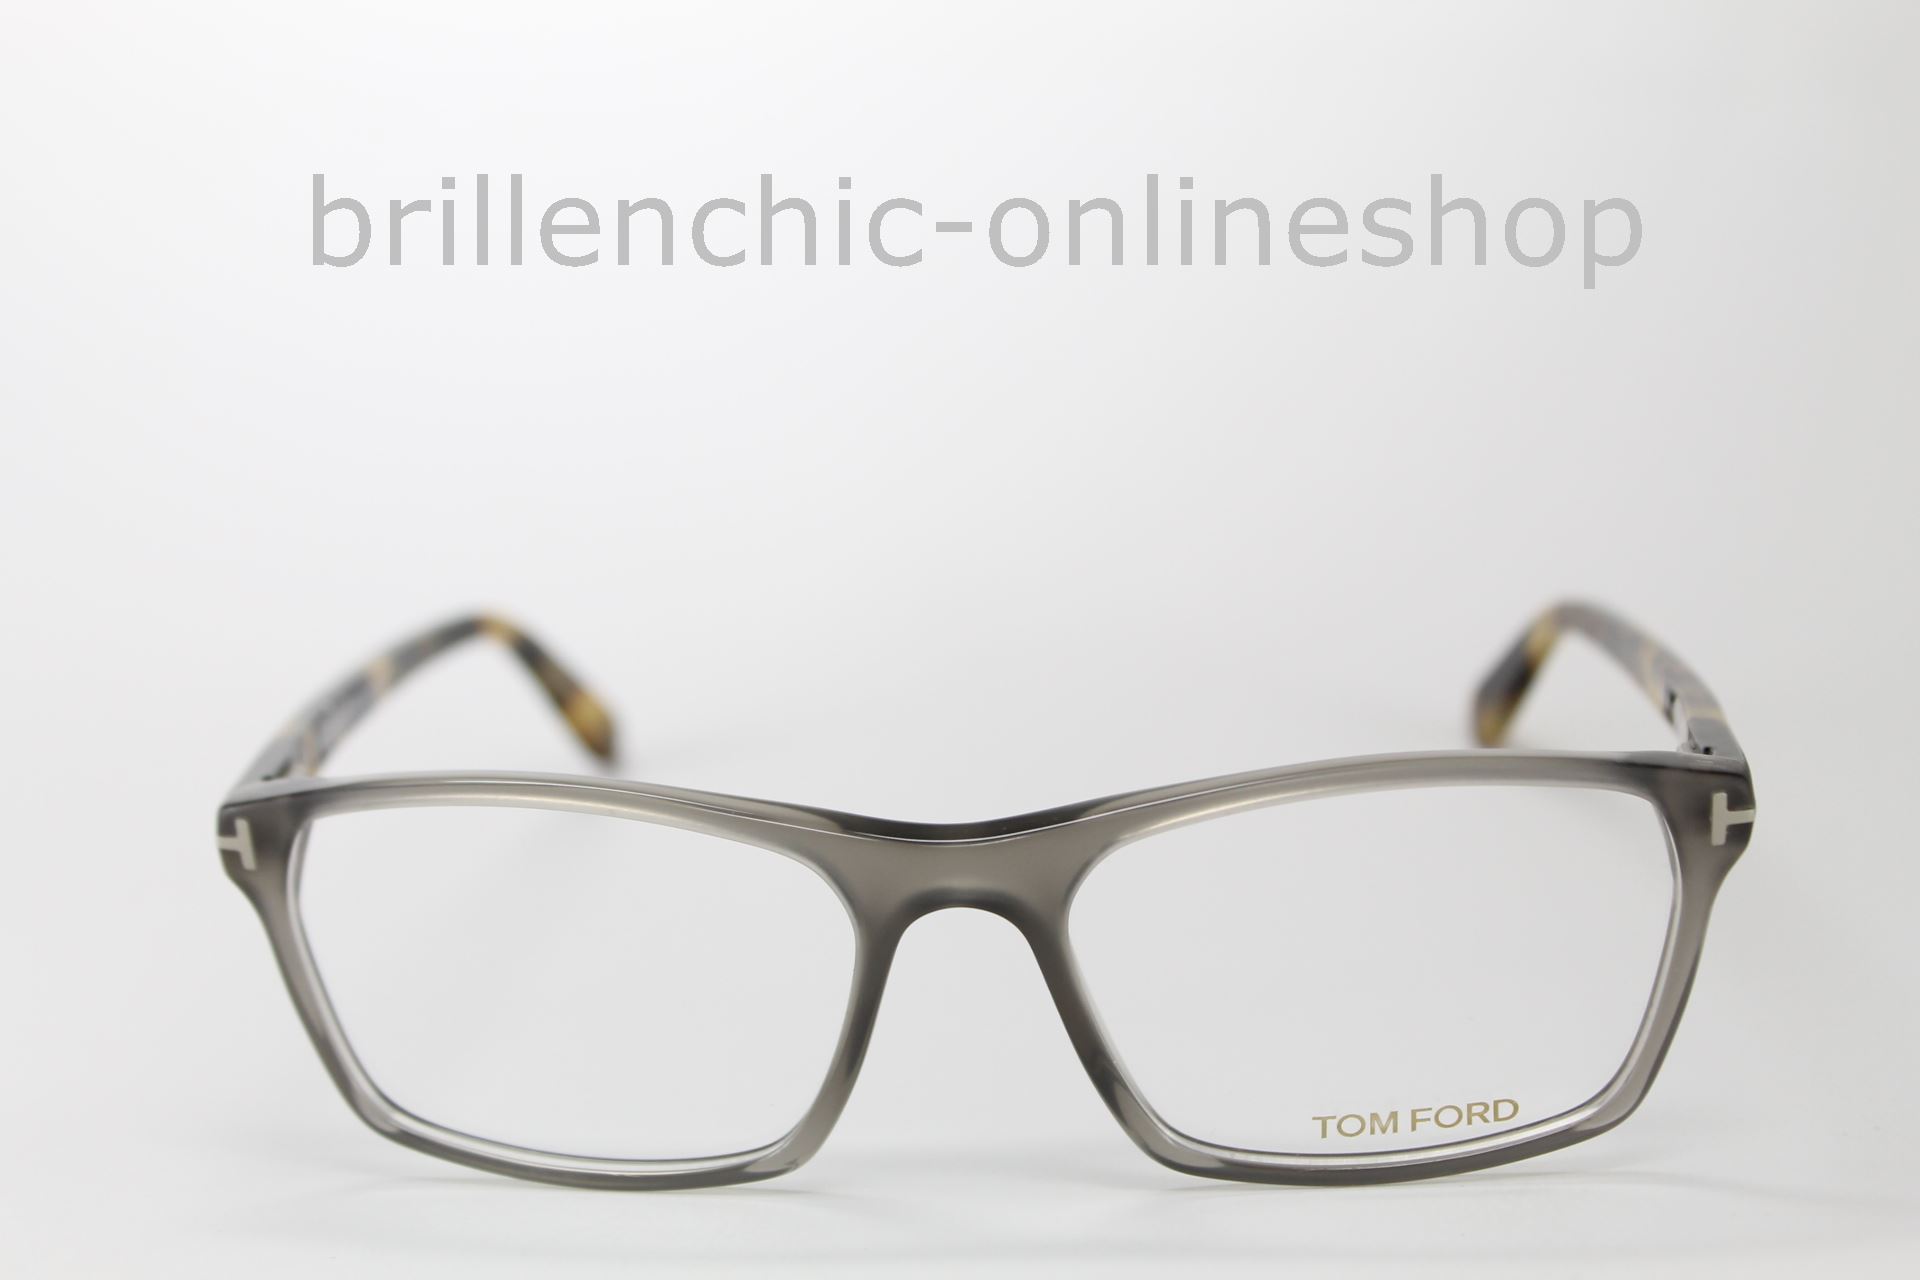 Brillenchic-onlineshop in Berlin - TOM FORD TF 5295 020 